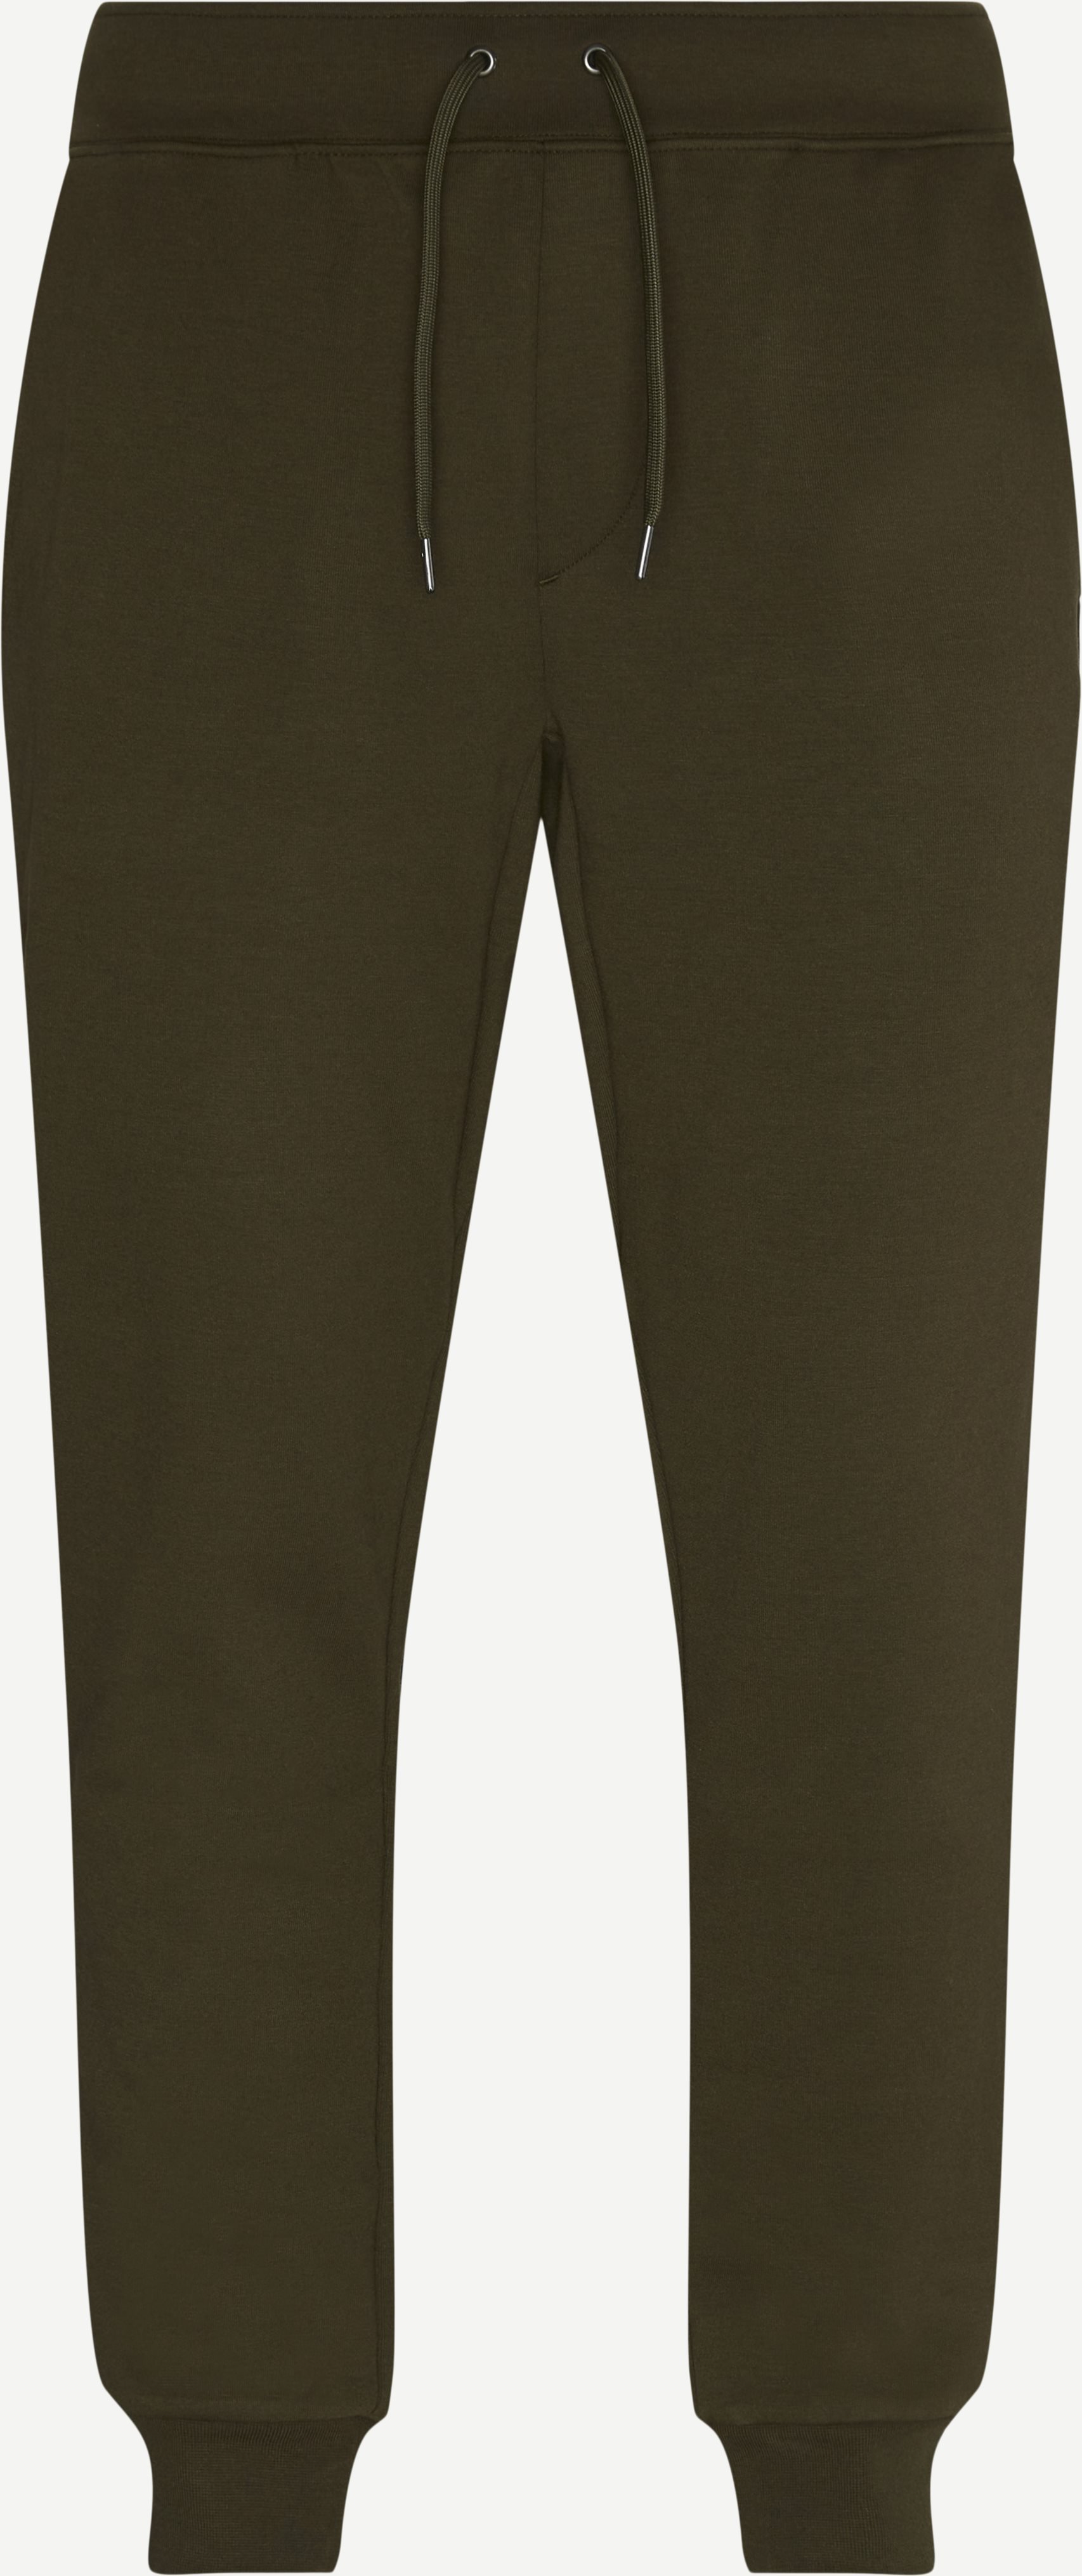 Polo Sweatpant - Trousers - Regular fit - Army